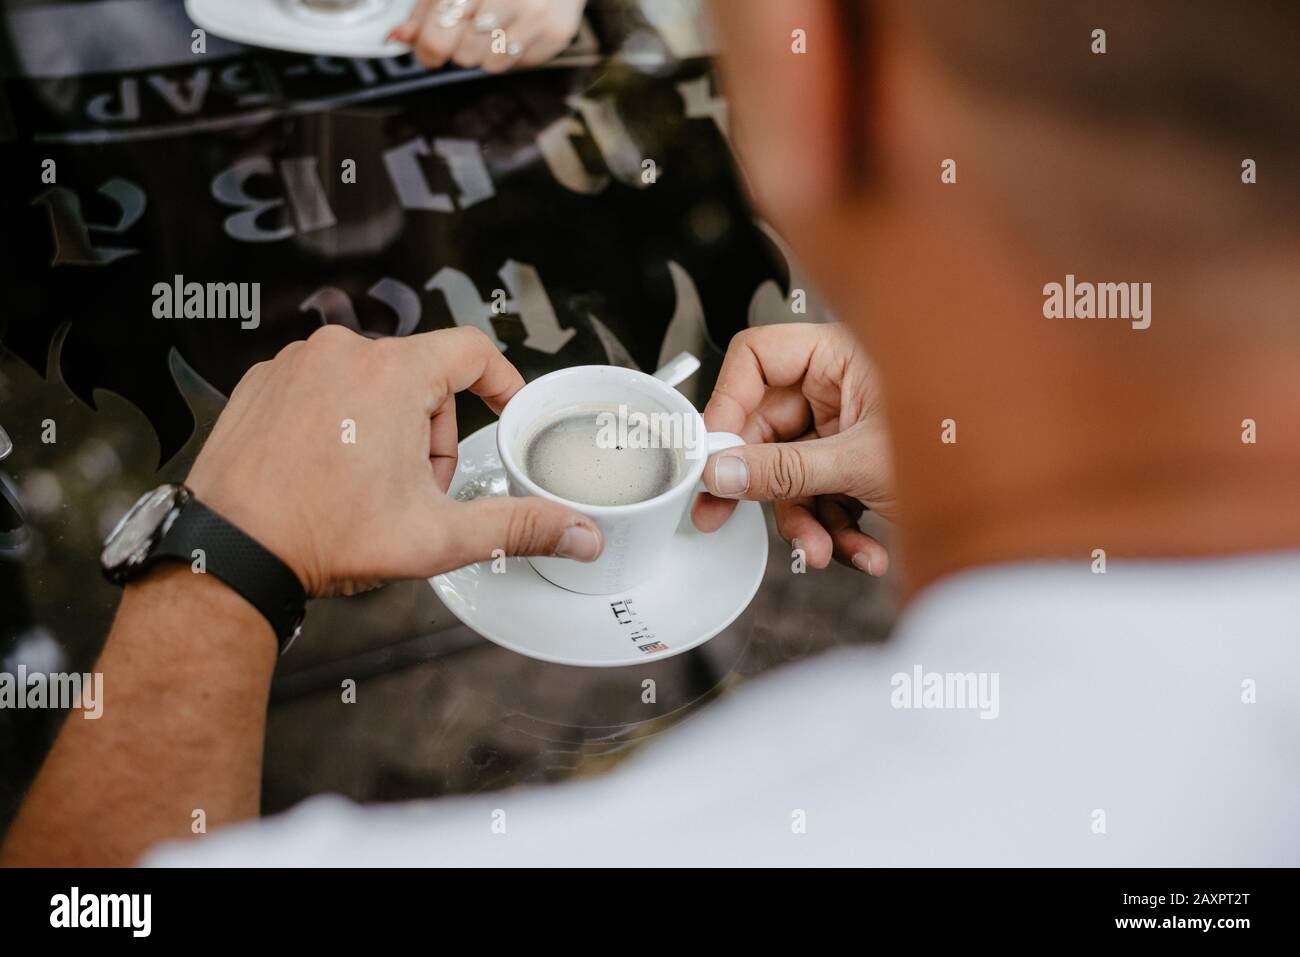 men's hands holding a cup of coffee Stock Photo